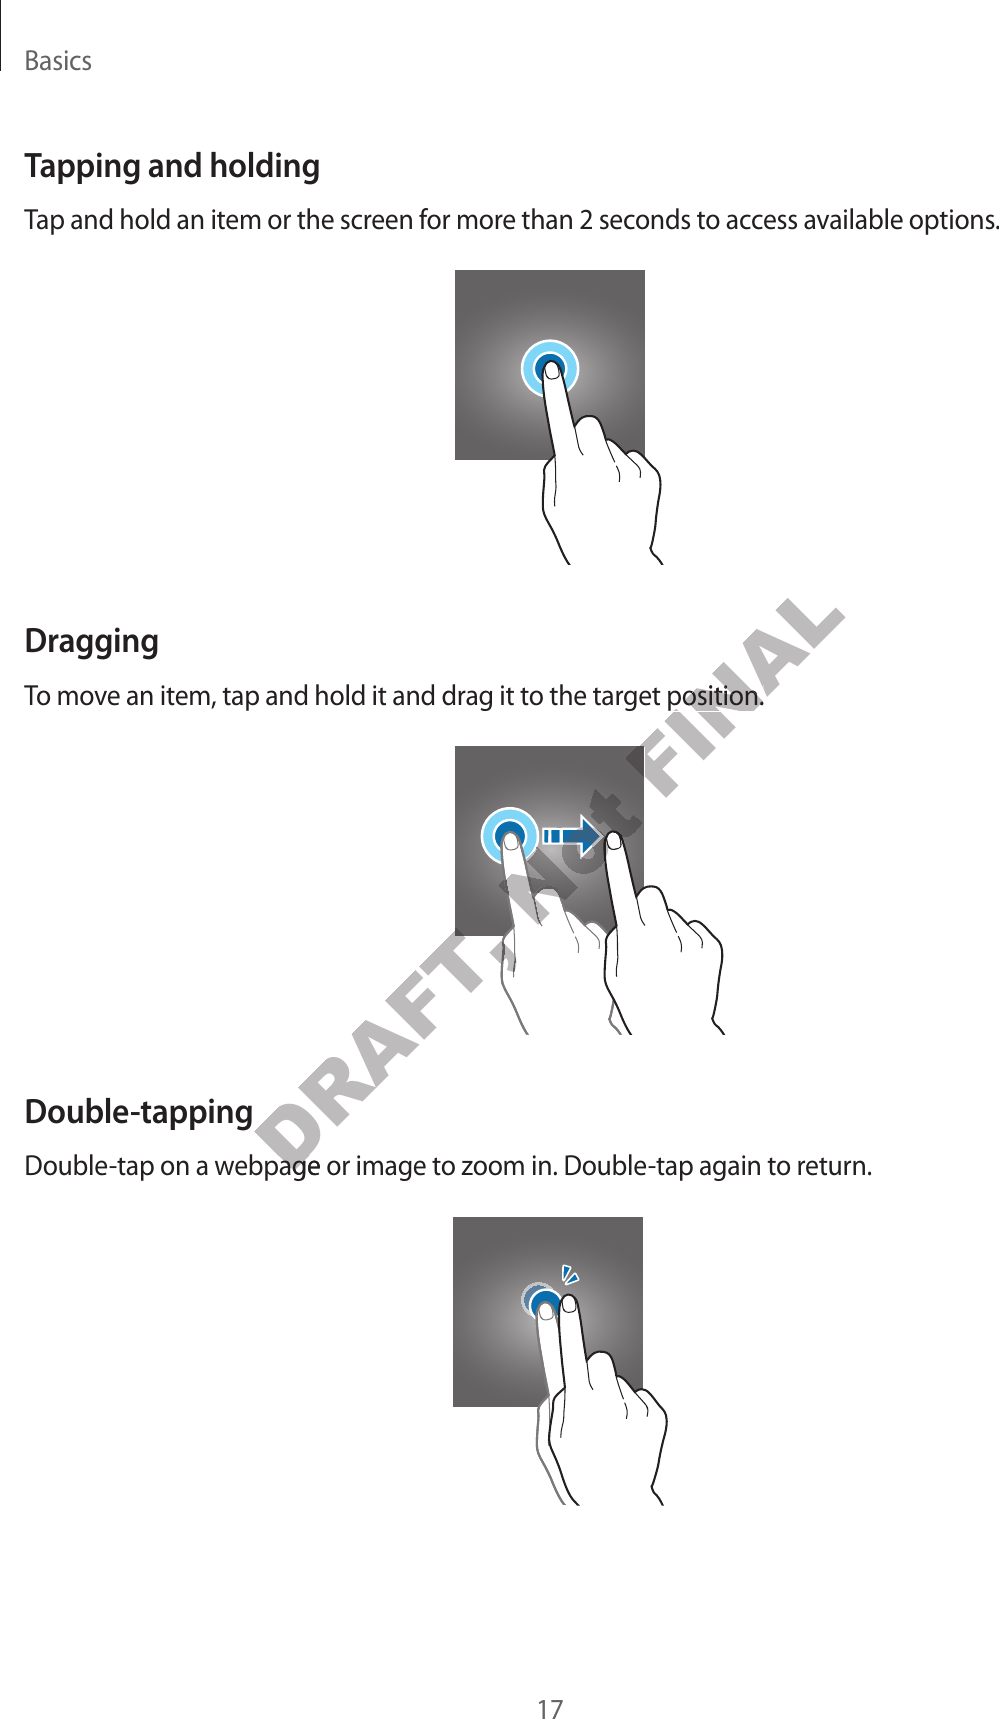 Basics17Tapping and holdingTap and hold an item or the screen f or mor e than 2 sec onds to ac cess a v ailable options .DraggingTo move an it em, tap and hold it and dr ag it to the tar get position.Double-tappingDouble-tap on a webpage or image to zoom in. Double-tap again to return.DRAFT, DRAFT, DRAFT, DRAFT, DRAFT, DRAFT, DRAFT, Double-tap on a webpage or image to zoom in. Double-tap again to return.DRAFT, Double-tap on a webpage or image to zoom in. Double-tap again to return.Not Not Not Not Not Not Not Not Not Not Not Not Not Not Not FINALTo move an it em, tap and hold it and dr ag it to the tar get position.FINALTo move an it em, tap and hold it and dr ag it to the tar get position.FINAL